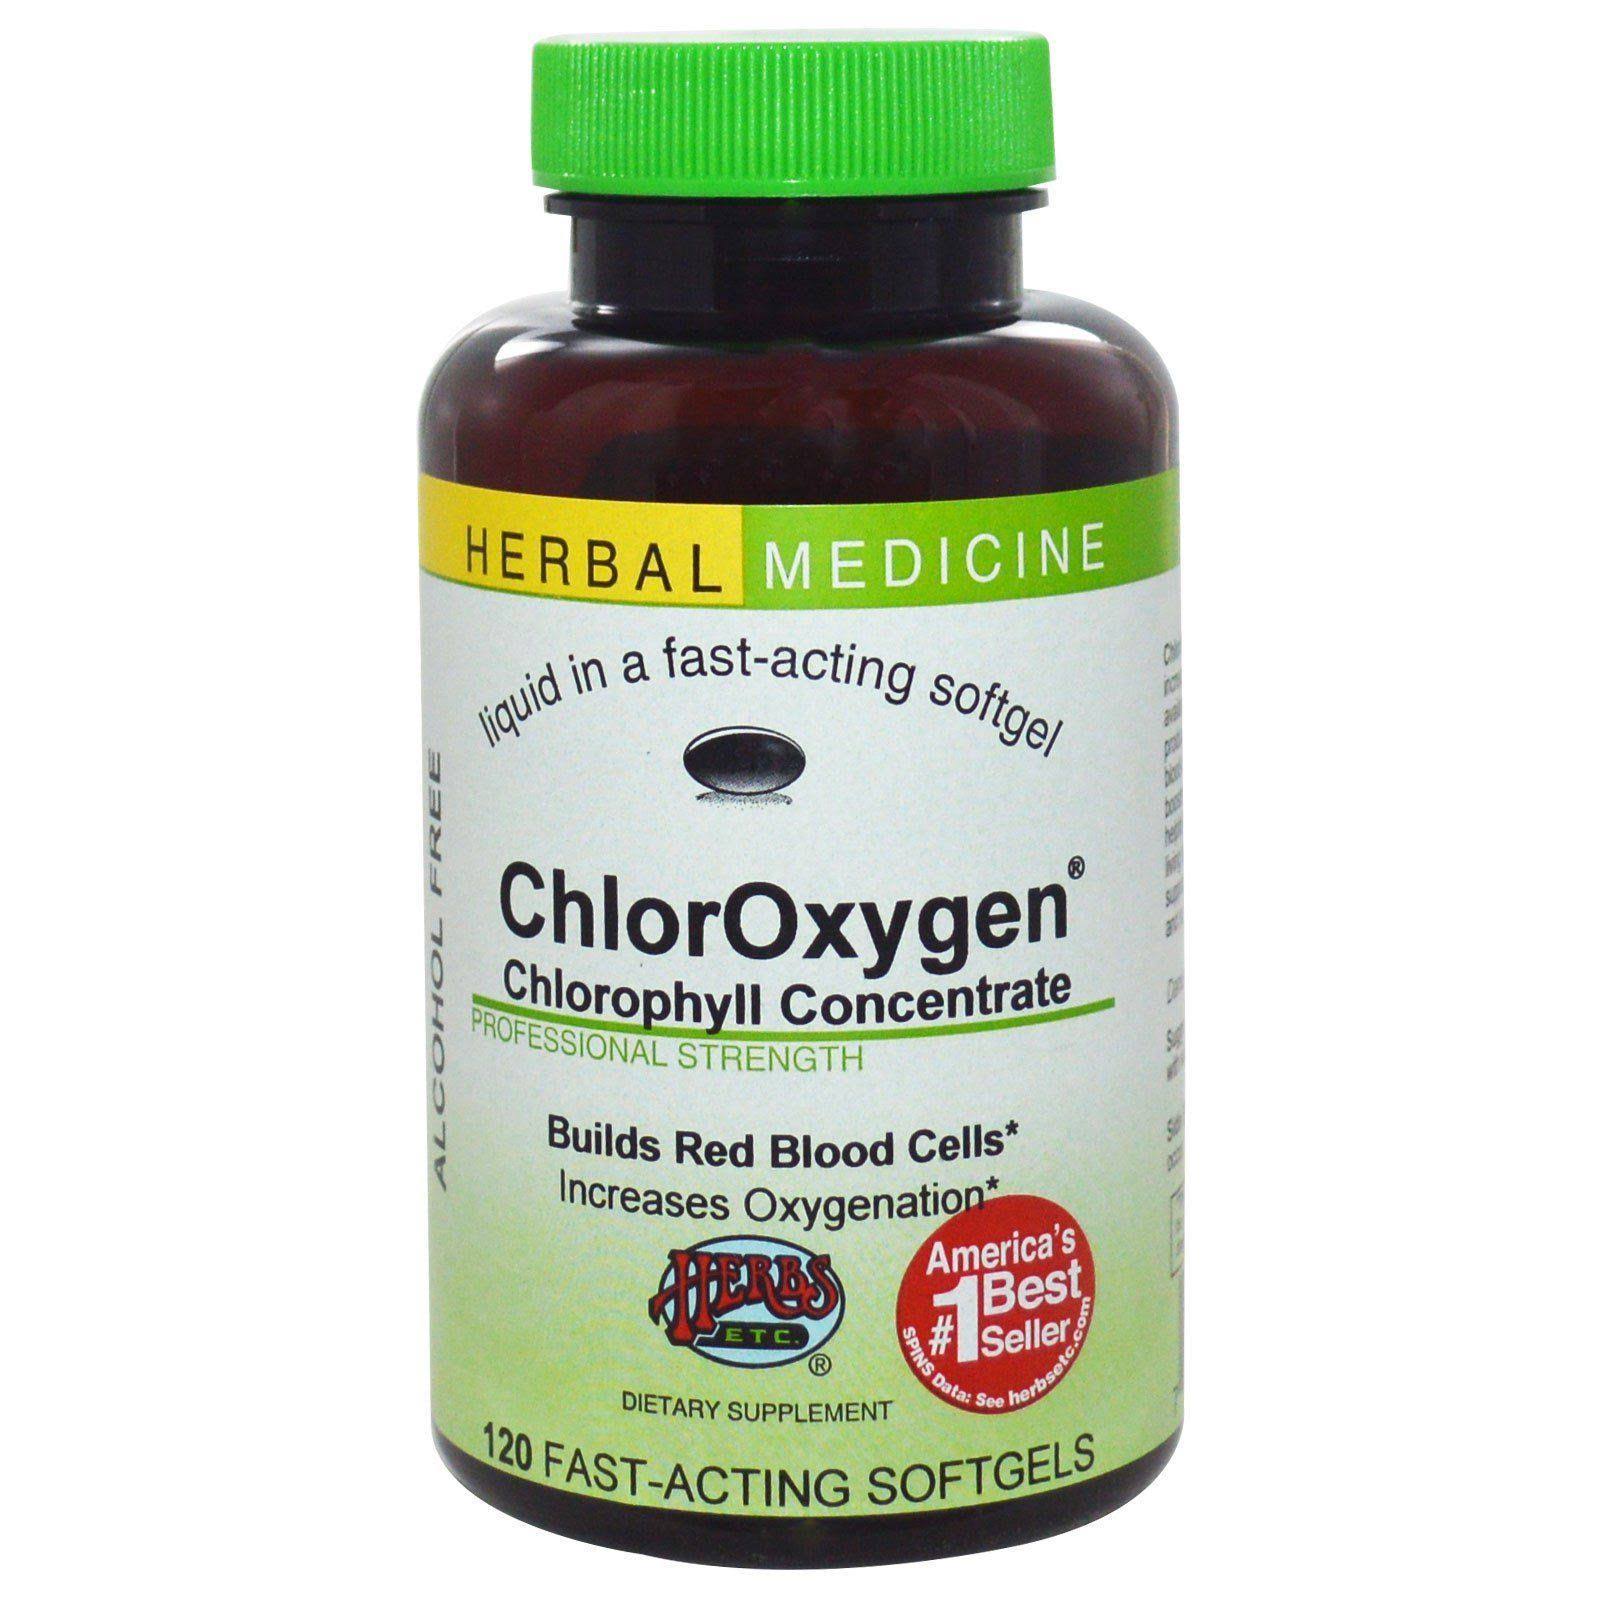 Herbs Etc ChlorOxygen Chlorophyll Concentrate Professional Strength Alcohol Free - 120 softgels